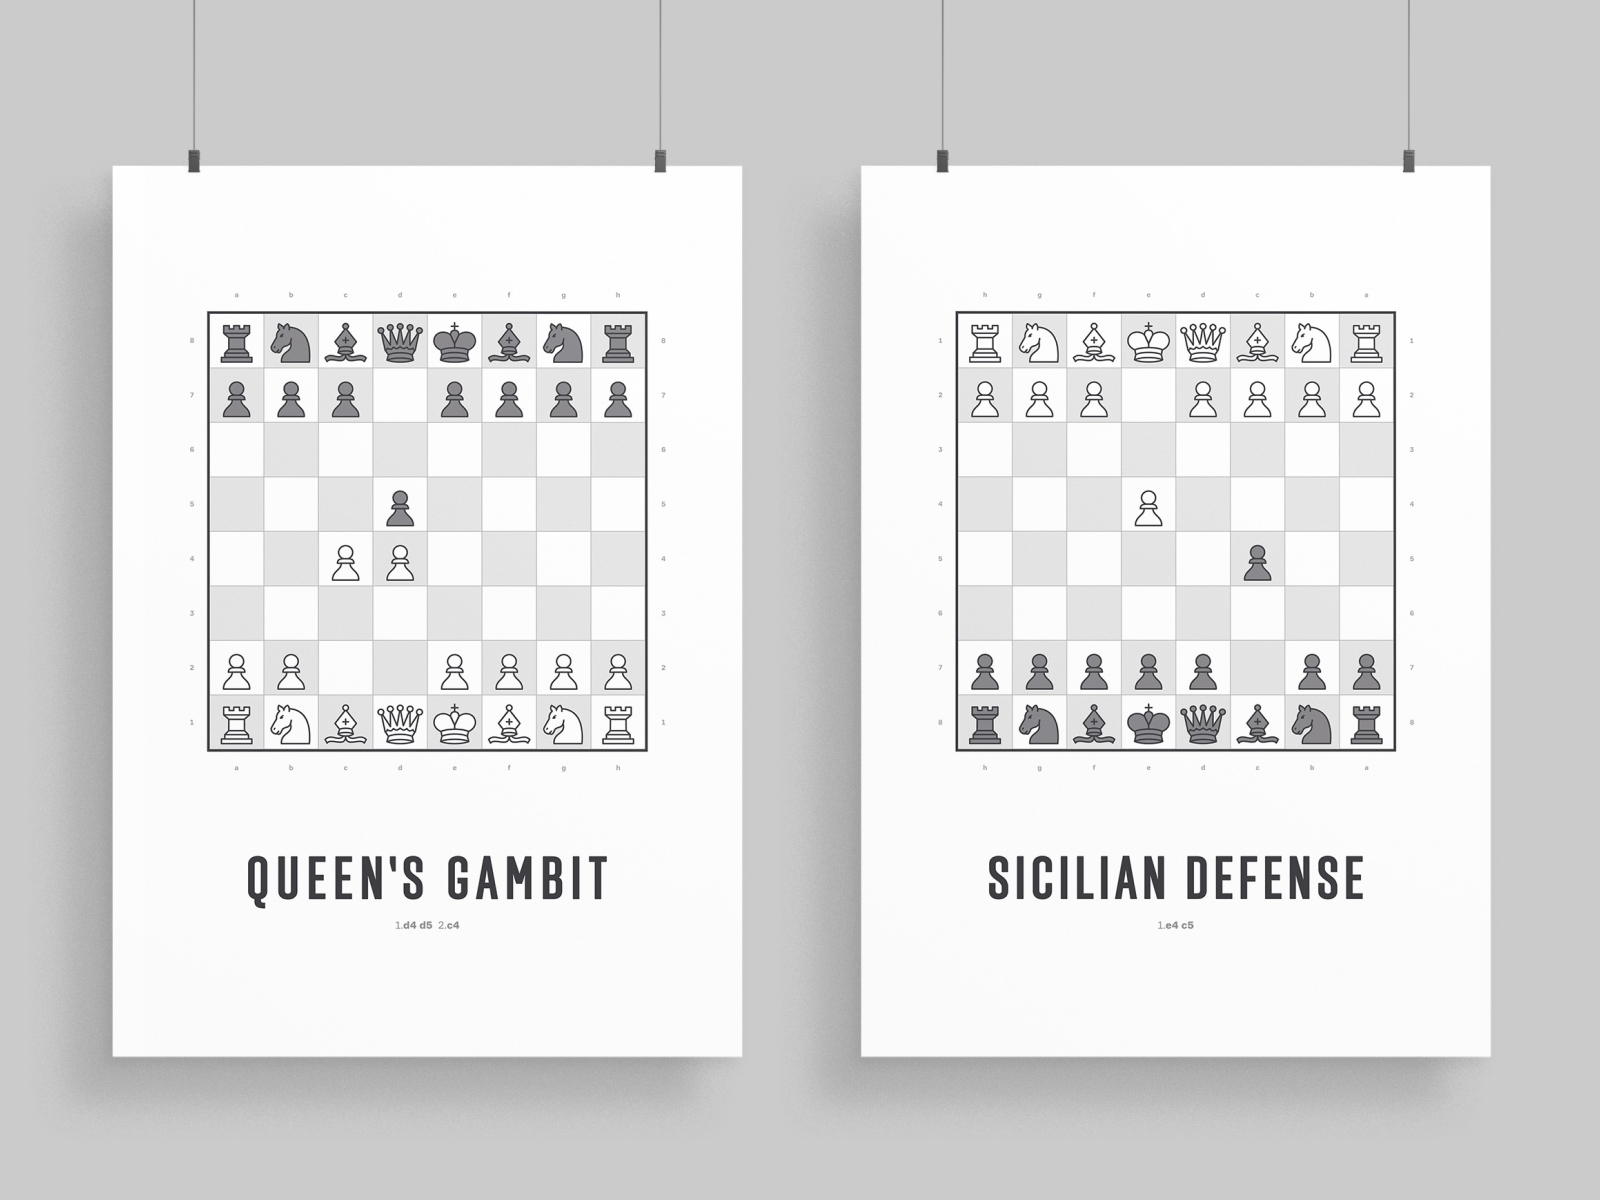 Ruy Lopez – Chess Opening Print by Dave Mullen Jnr on Dribbble